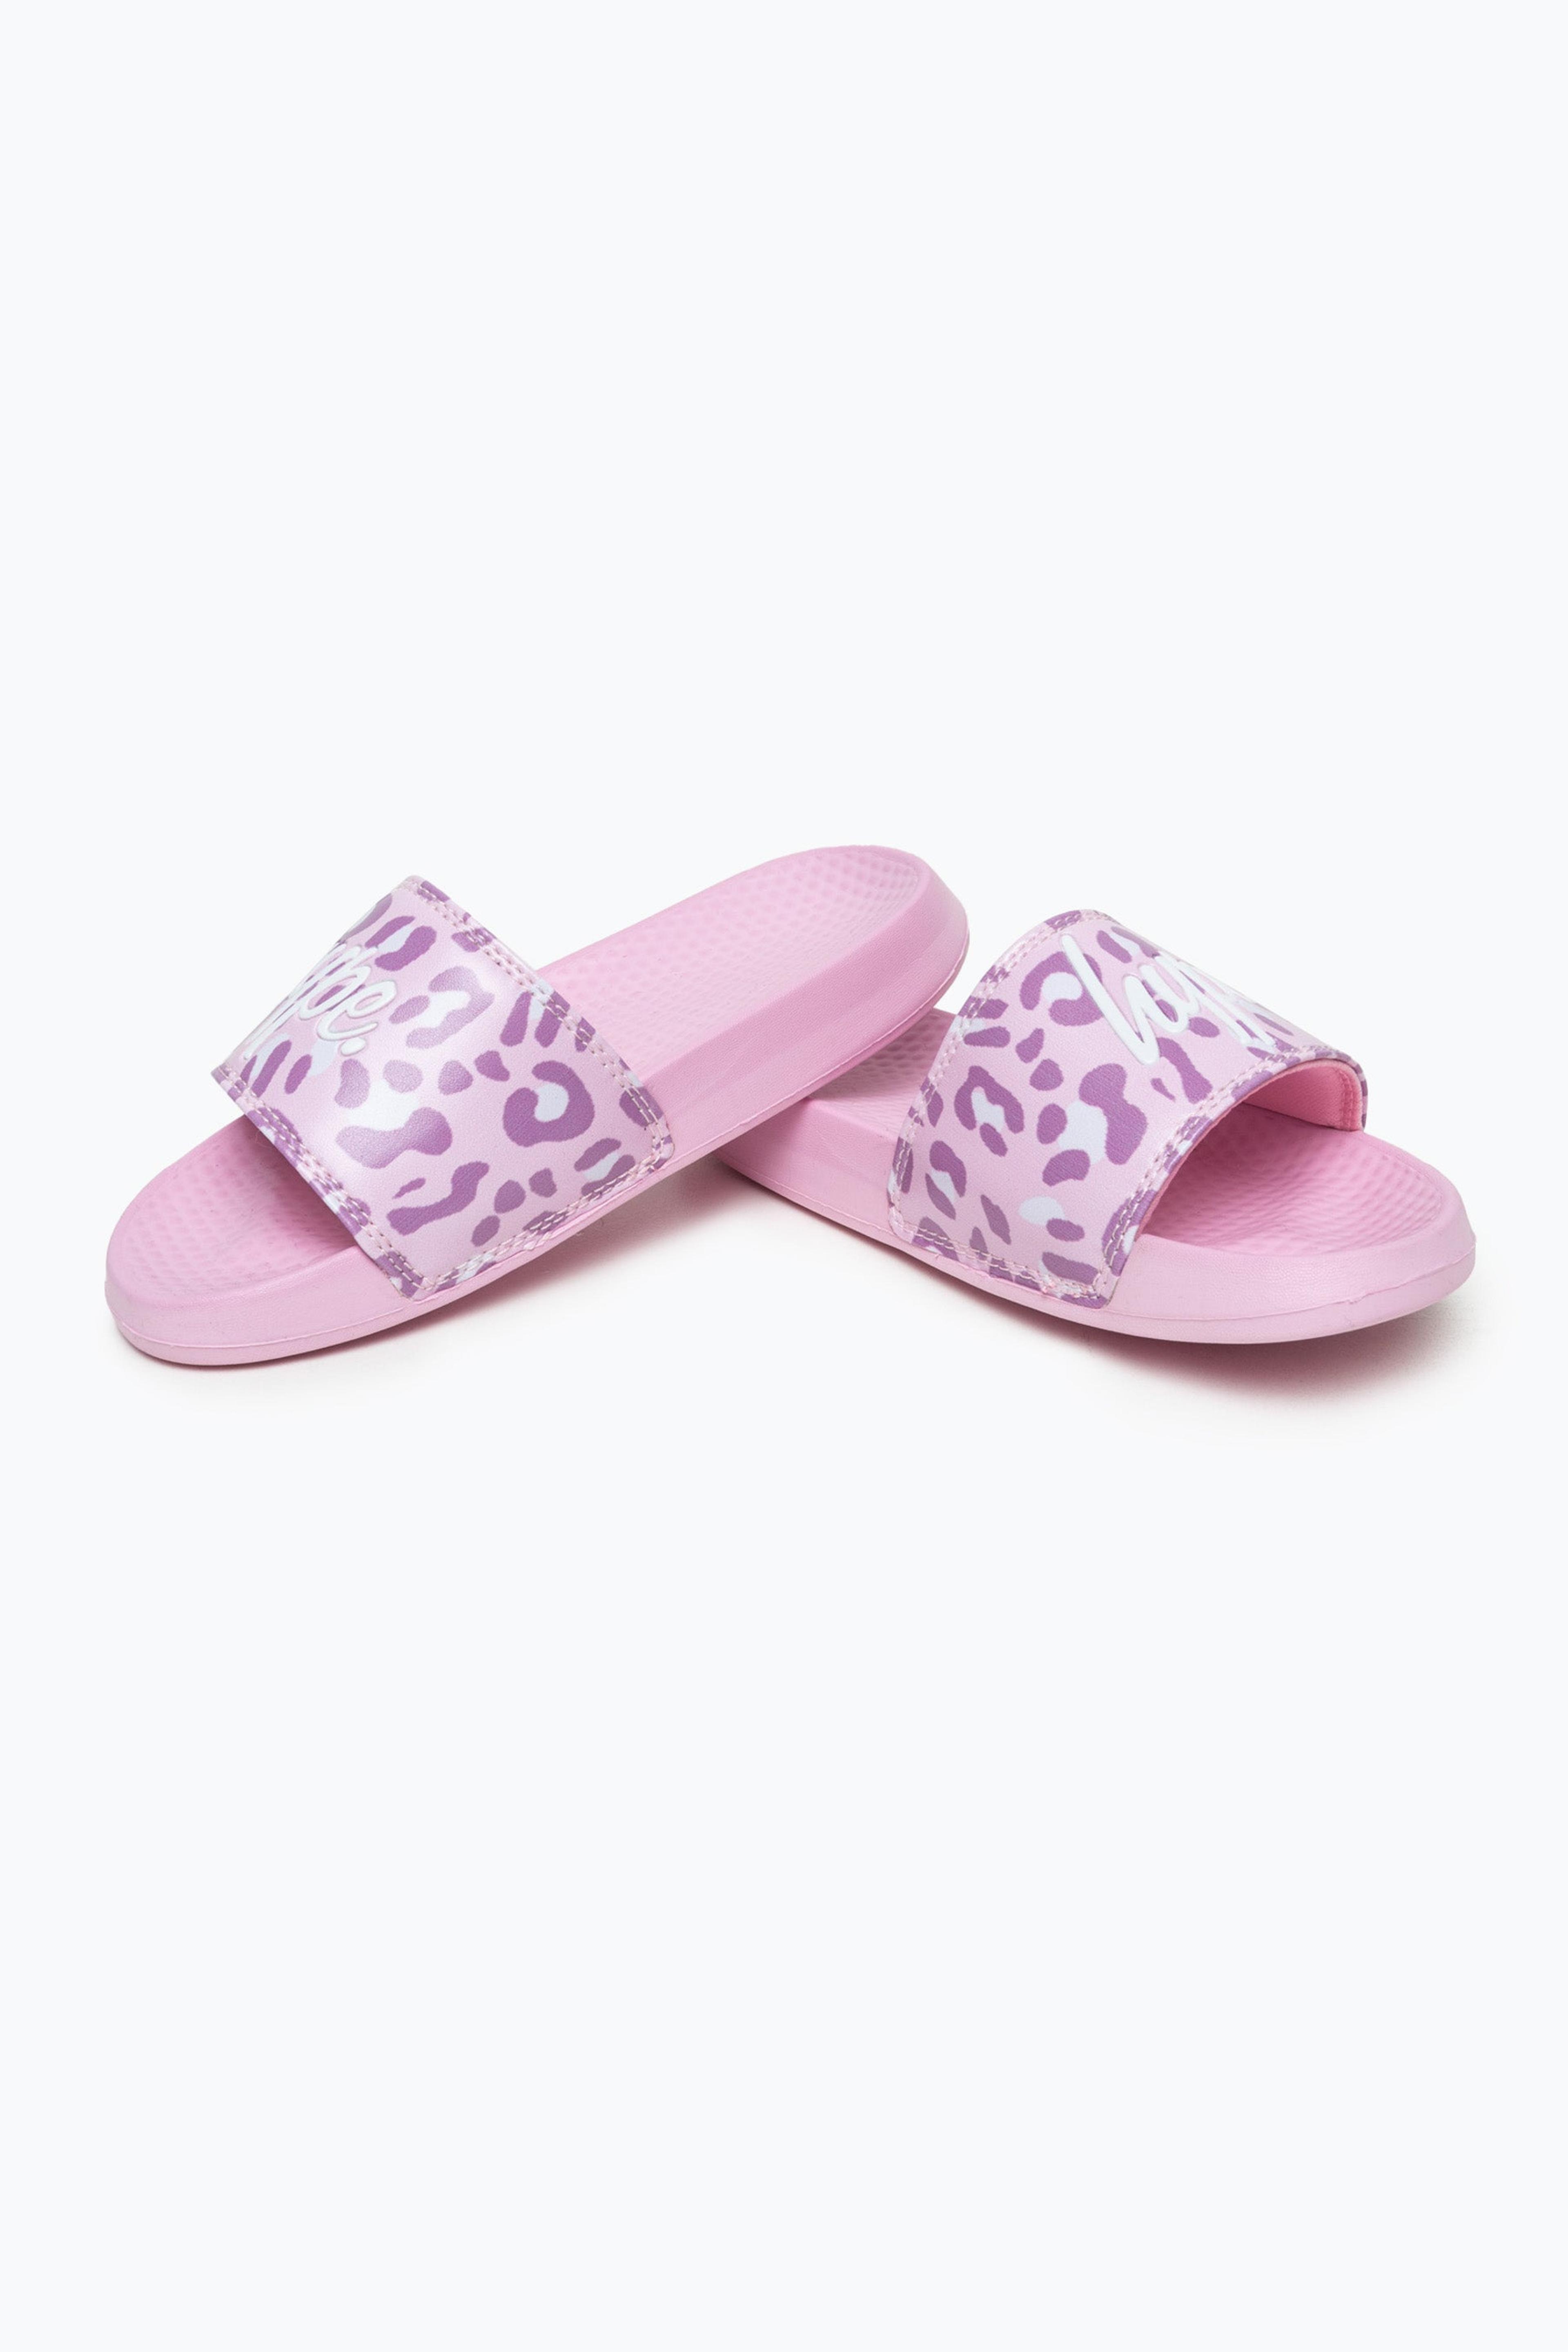 Alternate View 2 of HYPE KIDS UNISEX PINK TONE ON TONE LEOPARD CREST SLIDERS